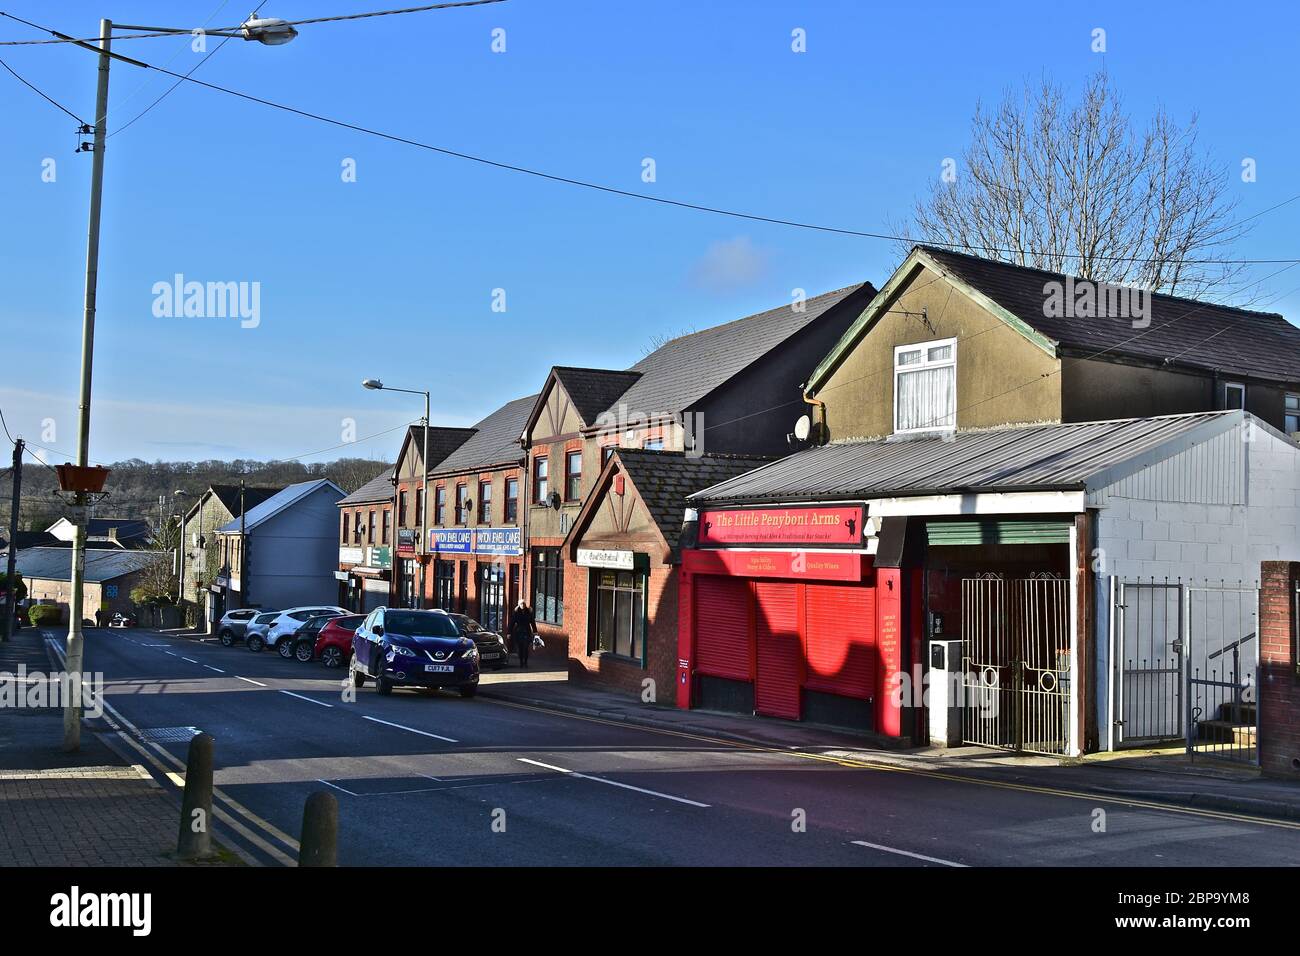 A general view of the shops and other small businesses along Penybont Road in the centre of the small Welsh town of Pencoed. Stock Photo